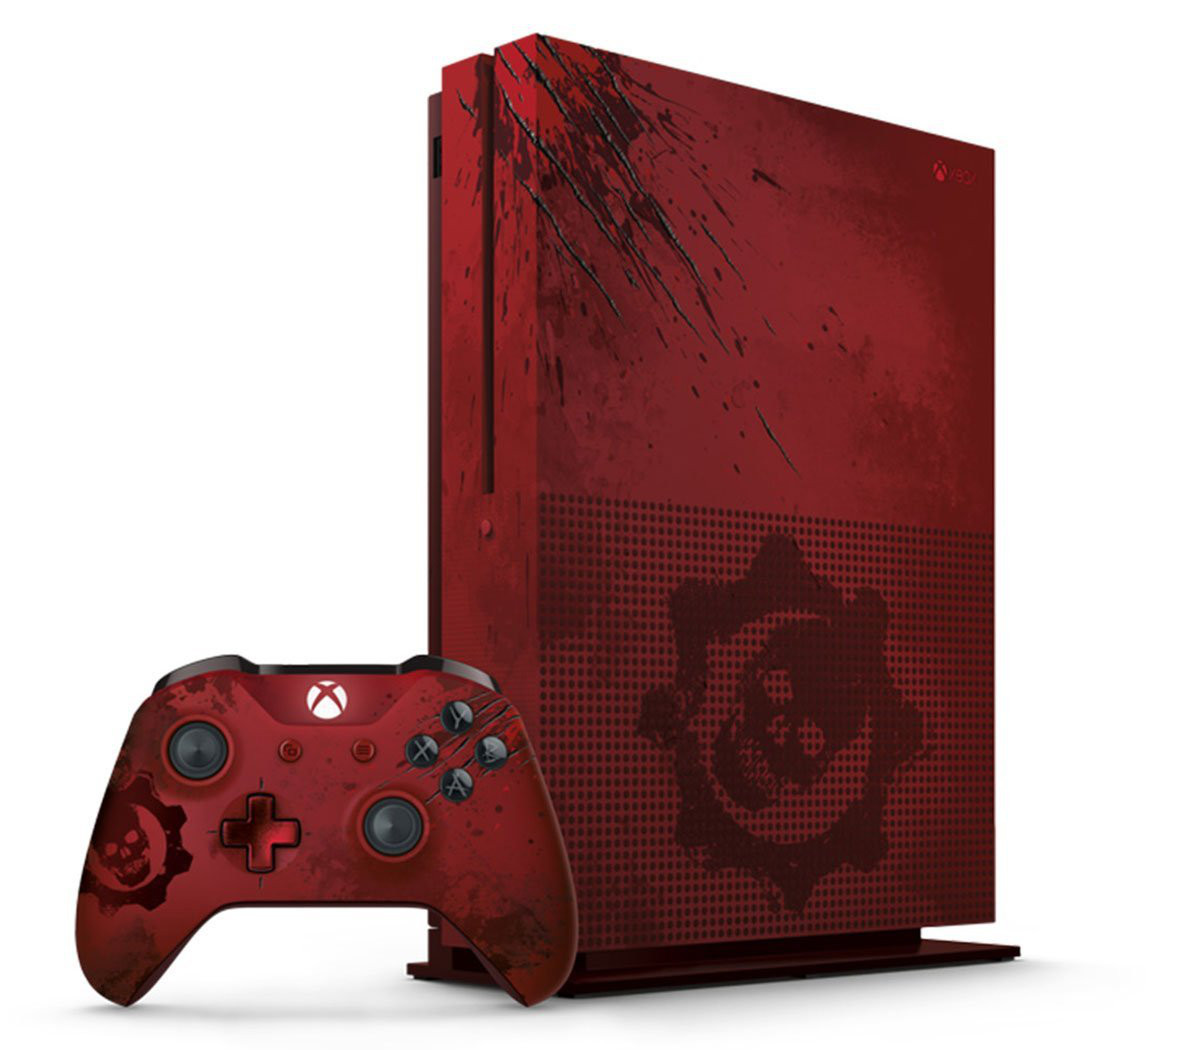 download free limited edition gears of war xbox one